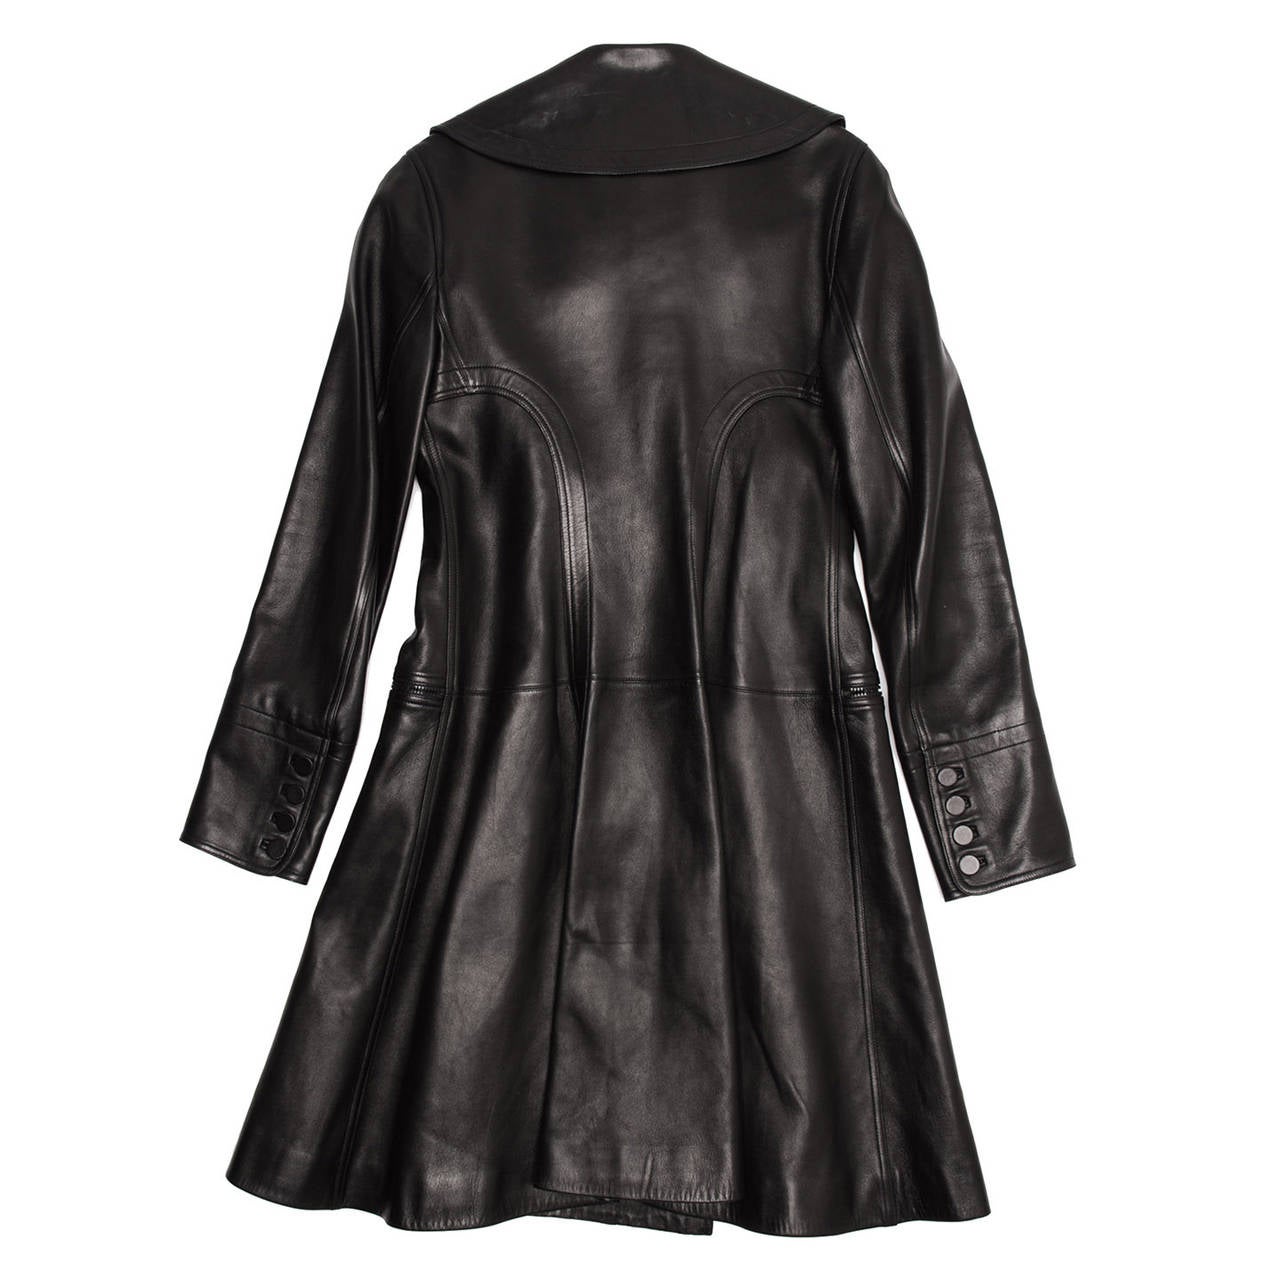 Black lambskin leather trench coat with fitted top and flared skirt. The lapel is quite wide with rounded edges, the six buttons at front are beautifully leather covered and two zipper pockets sit horizontal on the waist line. The cuffs are adorned